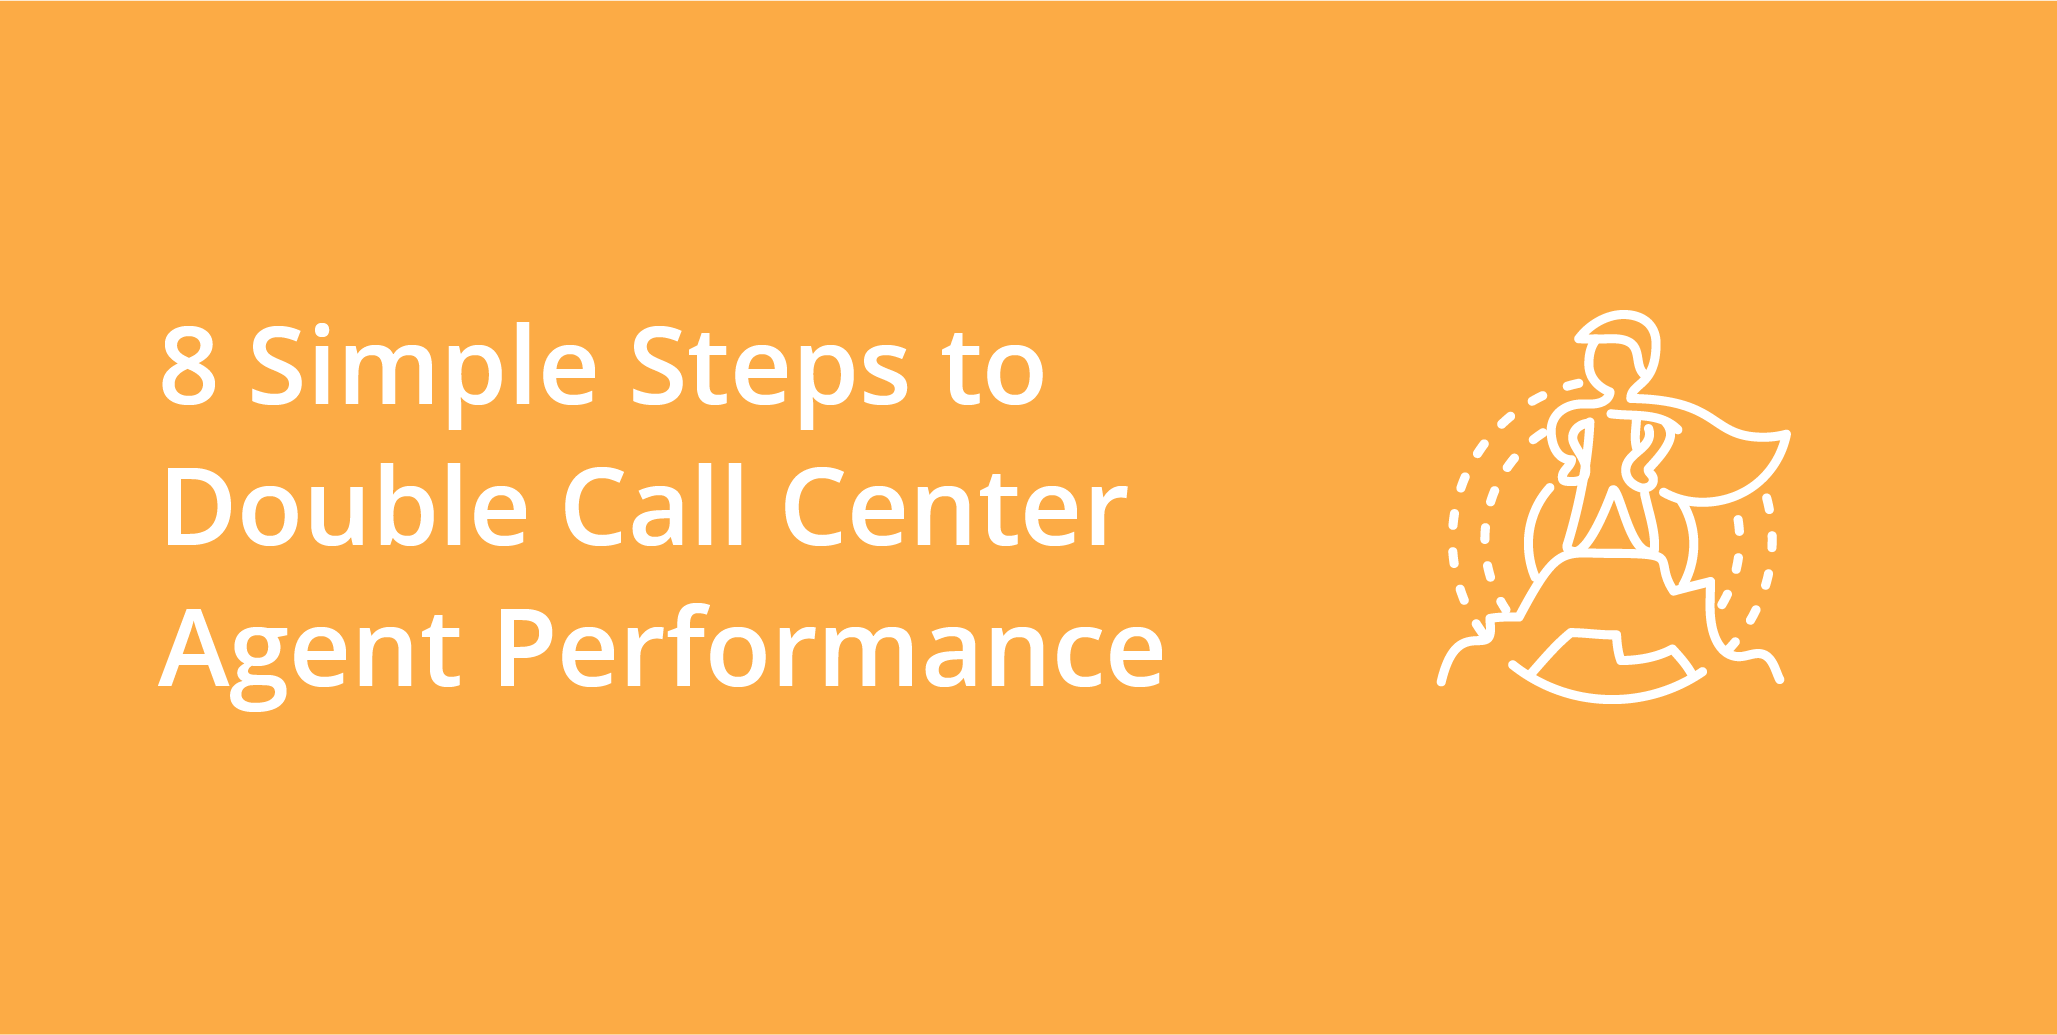 8 Simple Steps to Double Call Center Agent Performance | Telephones for business